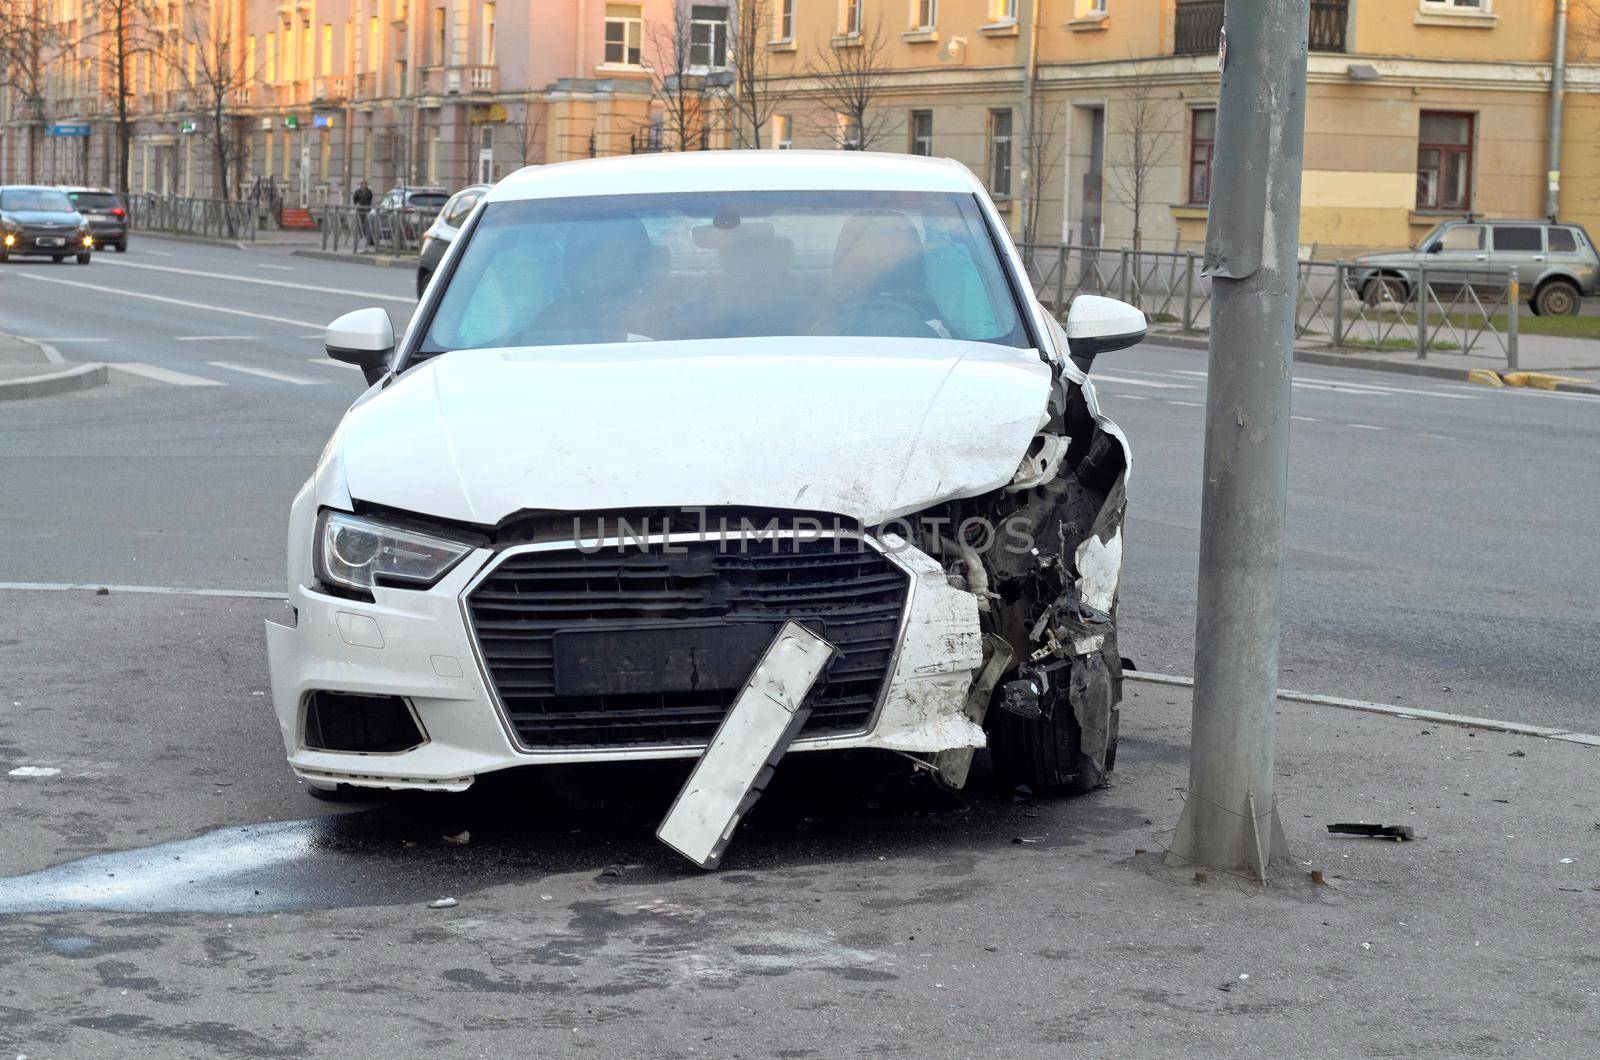 The front part of the damaged car as a result of the accident at the pole.Car accident insurance.